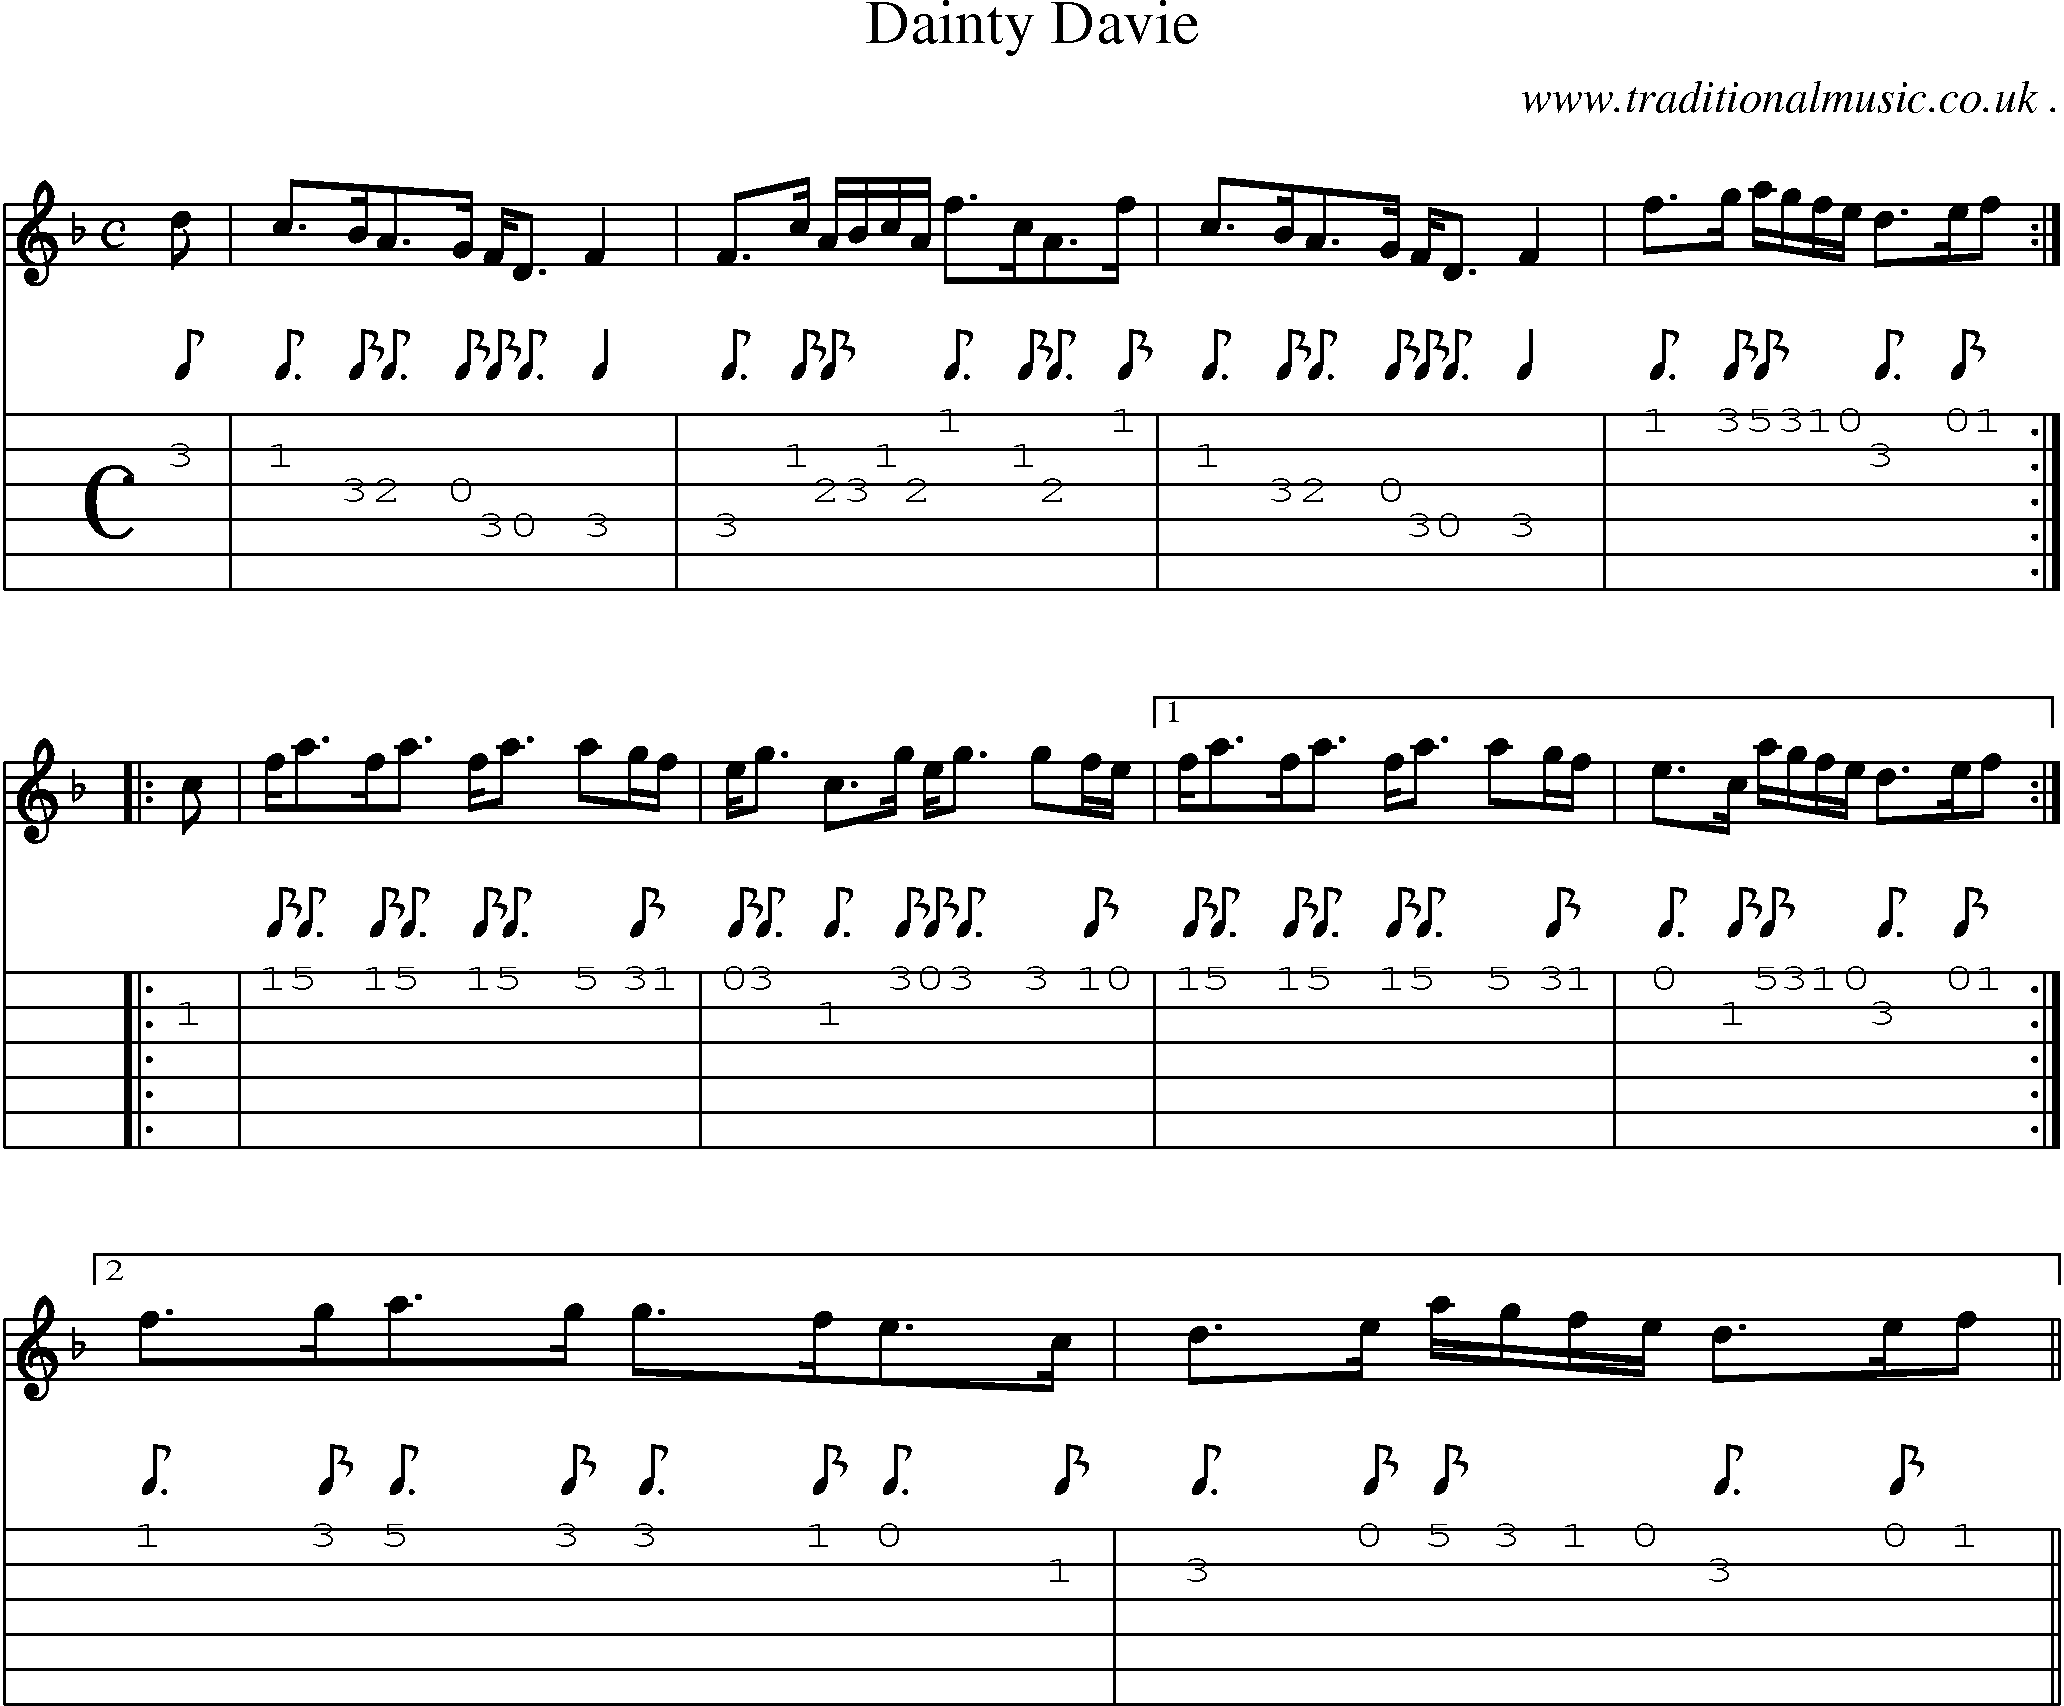 Sheet-music  score, Chords and Guitar Tabs for Dainty Davie